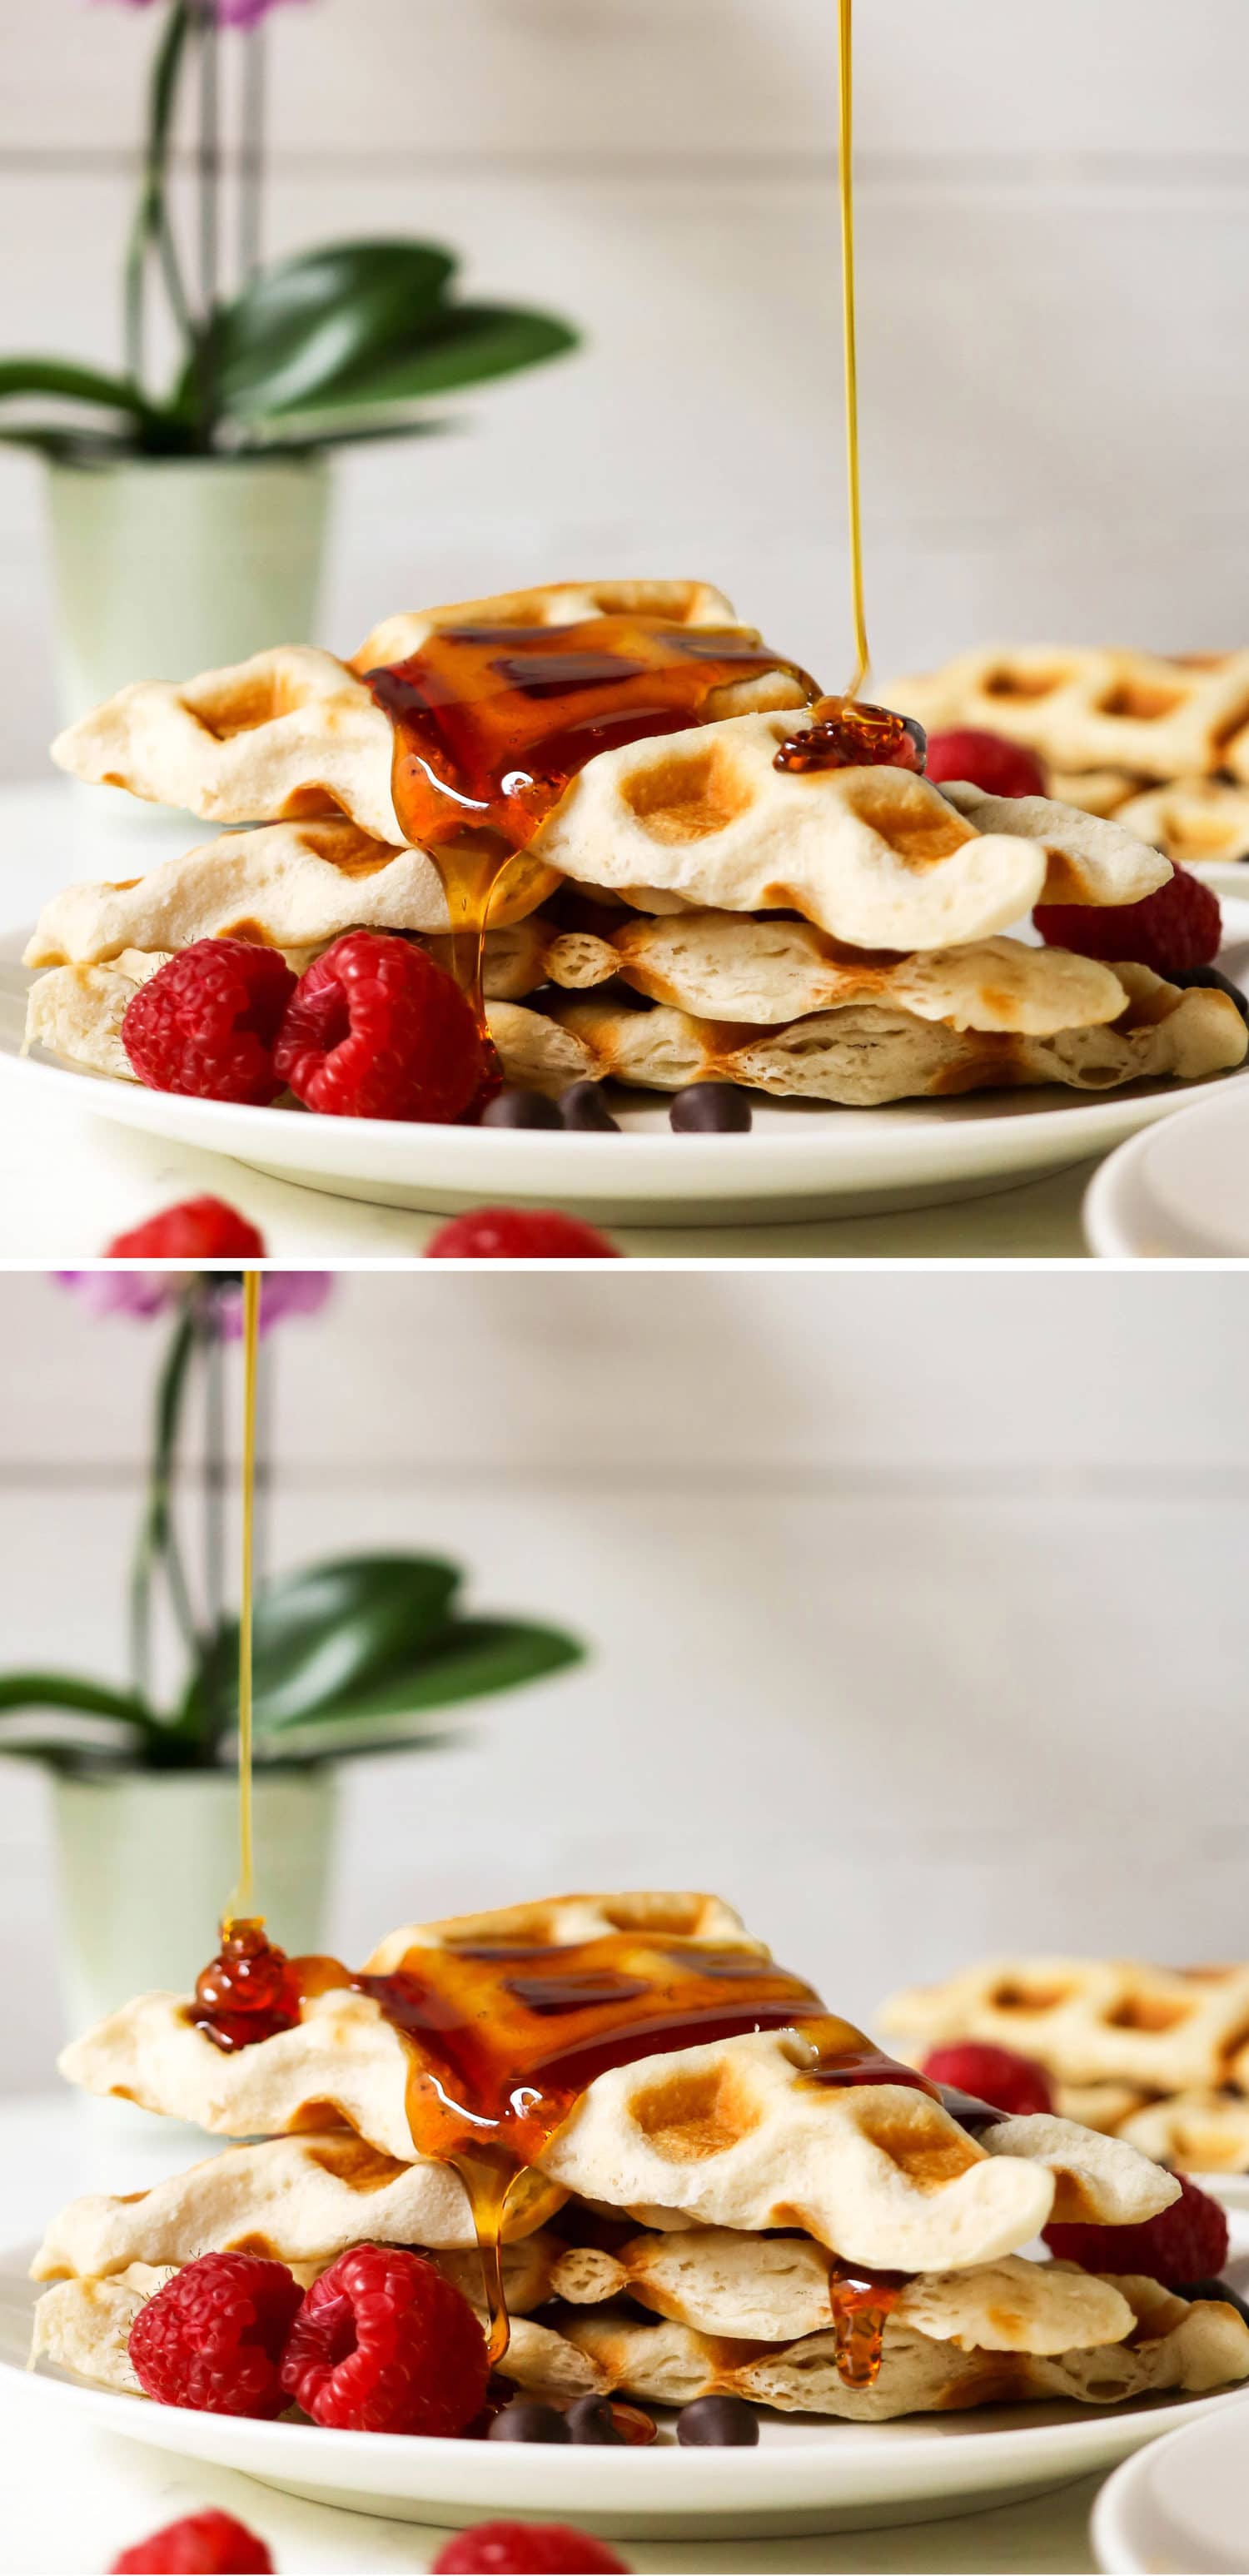 Easy Crescent Waffles - low sugar, low fat, dairy free, and vegan, with just 90 calories each! Healthy dessert recipes at the Desserts With Benefits Blog (www.DessertsWithBenefits.com)